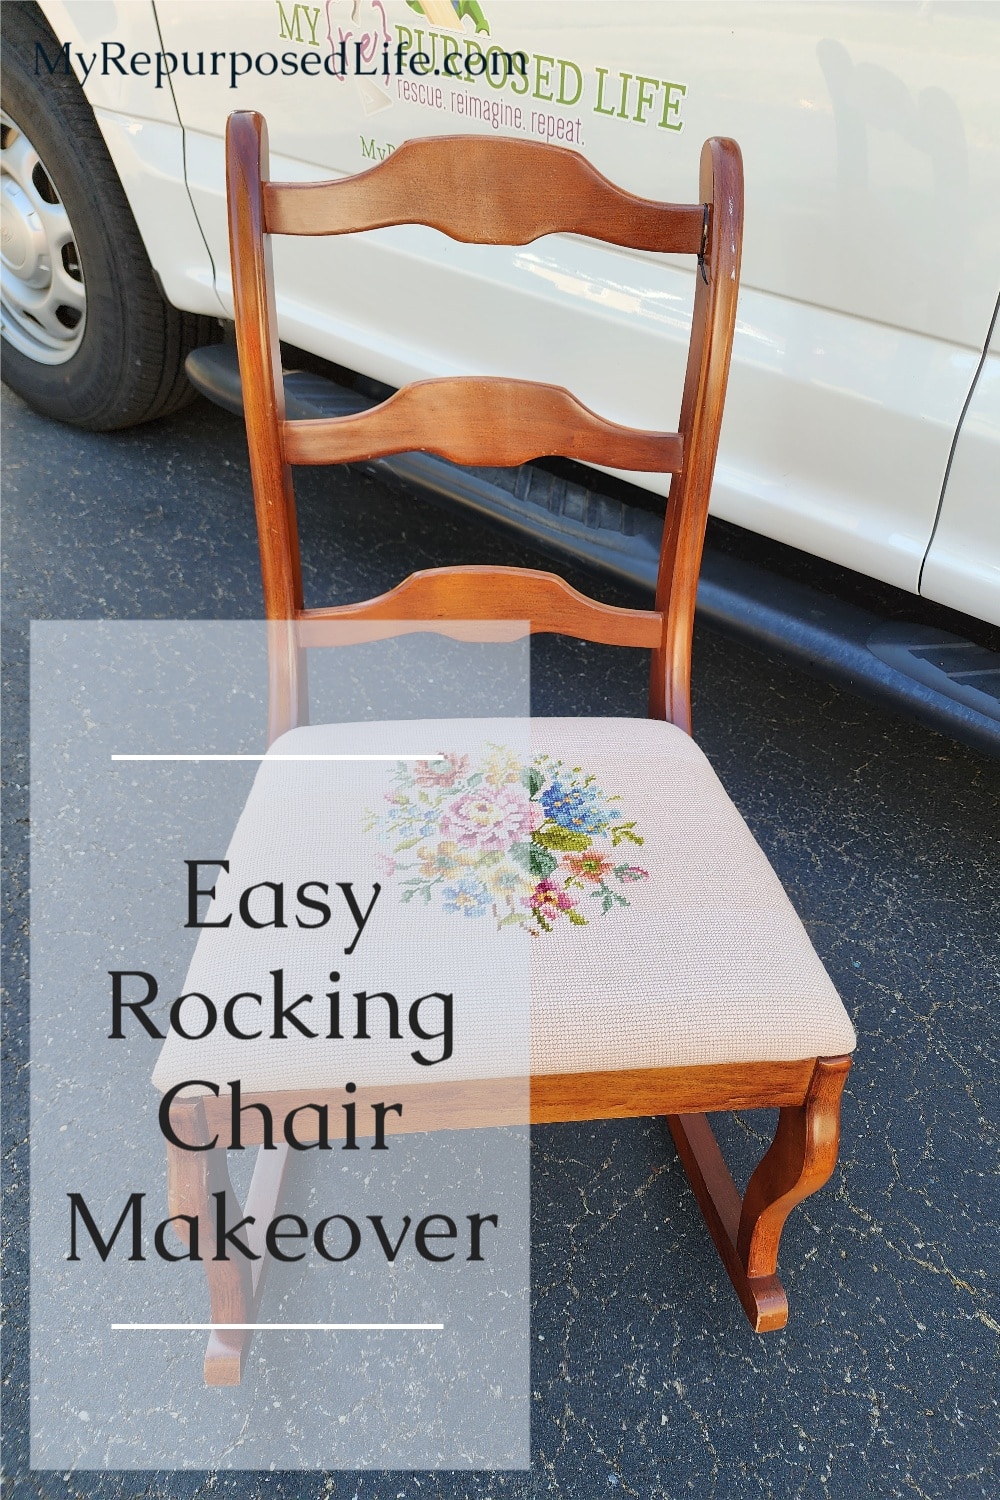 This article, easy rocking chair makeover will show you how to do an easy makeover on thrift store furniture projects. Tips for preparing furniture for paint. #MyRepurposedLife #upcycle #furniture #rockingchair #makeover via @repurposedlife